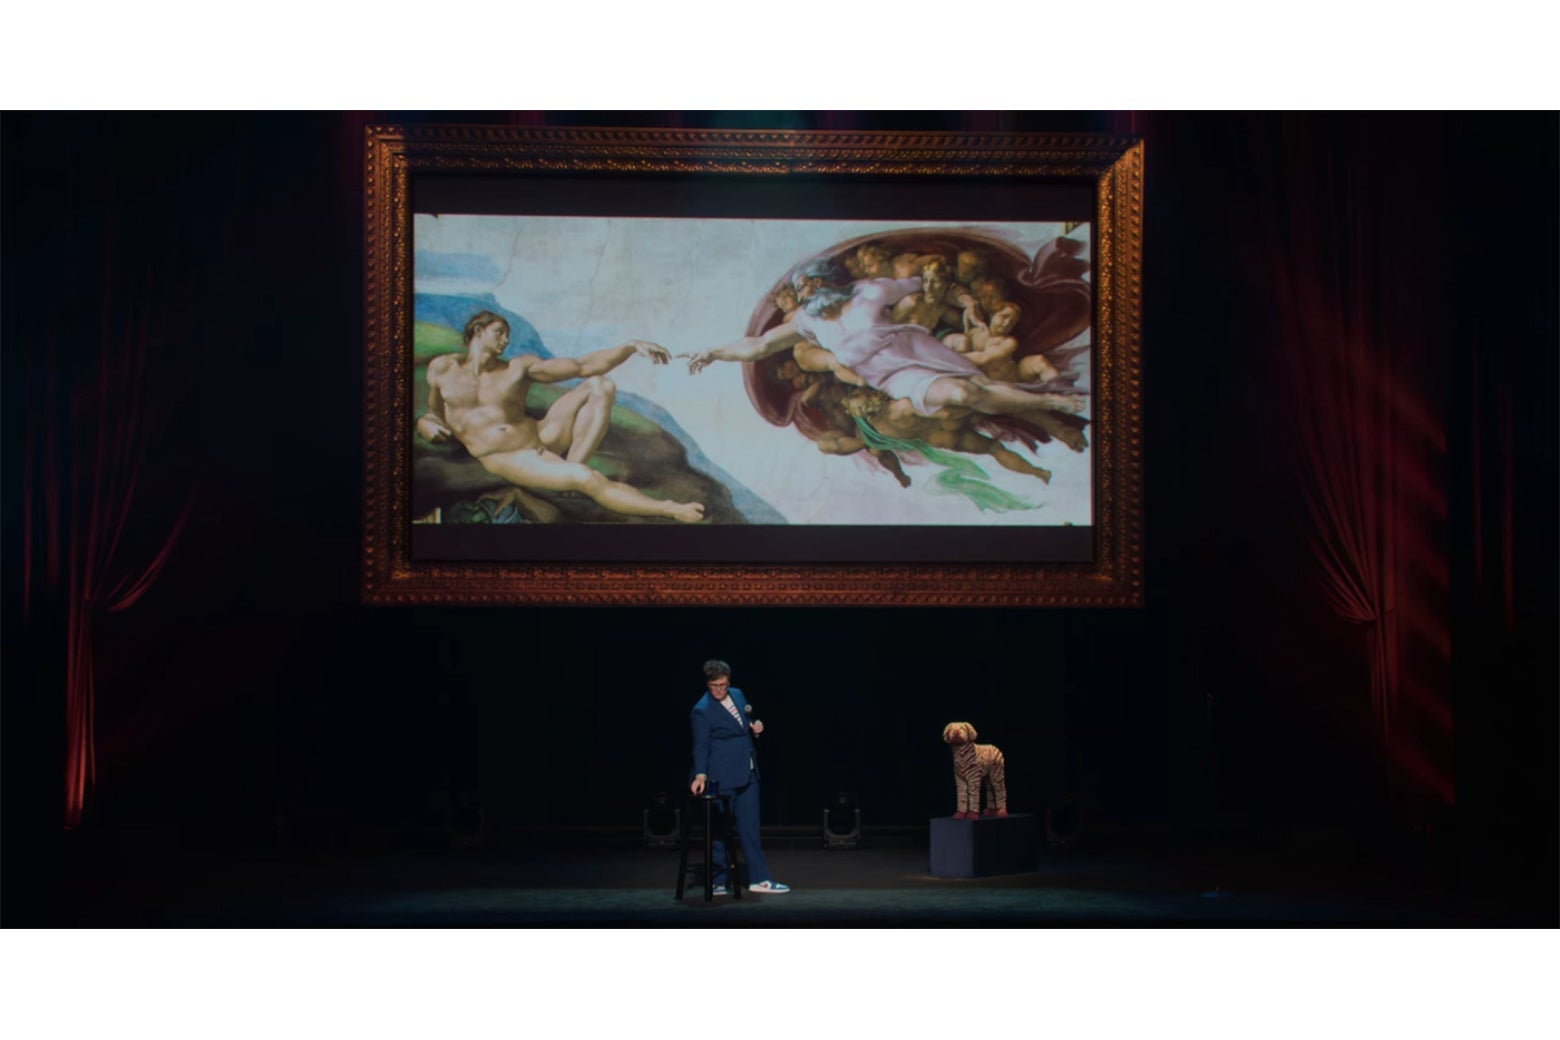 Hannah Gadsby onstage in front of a screen displaying Michelangelo's painting of God reaching out to touch Adam.